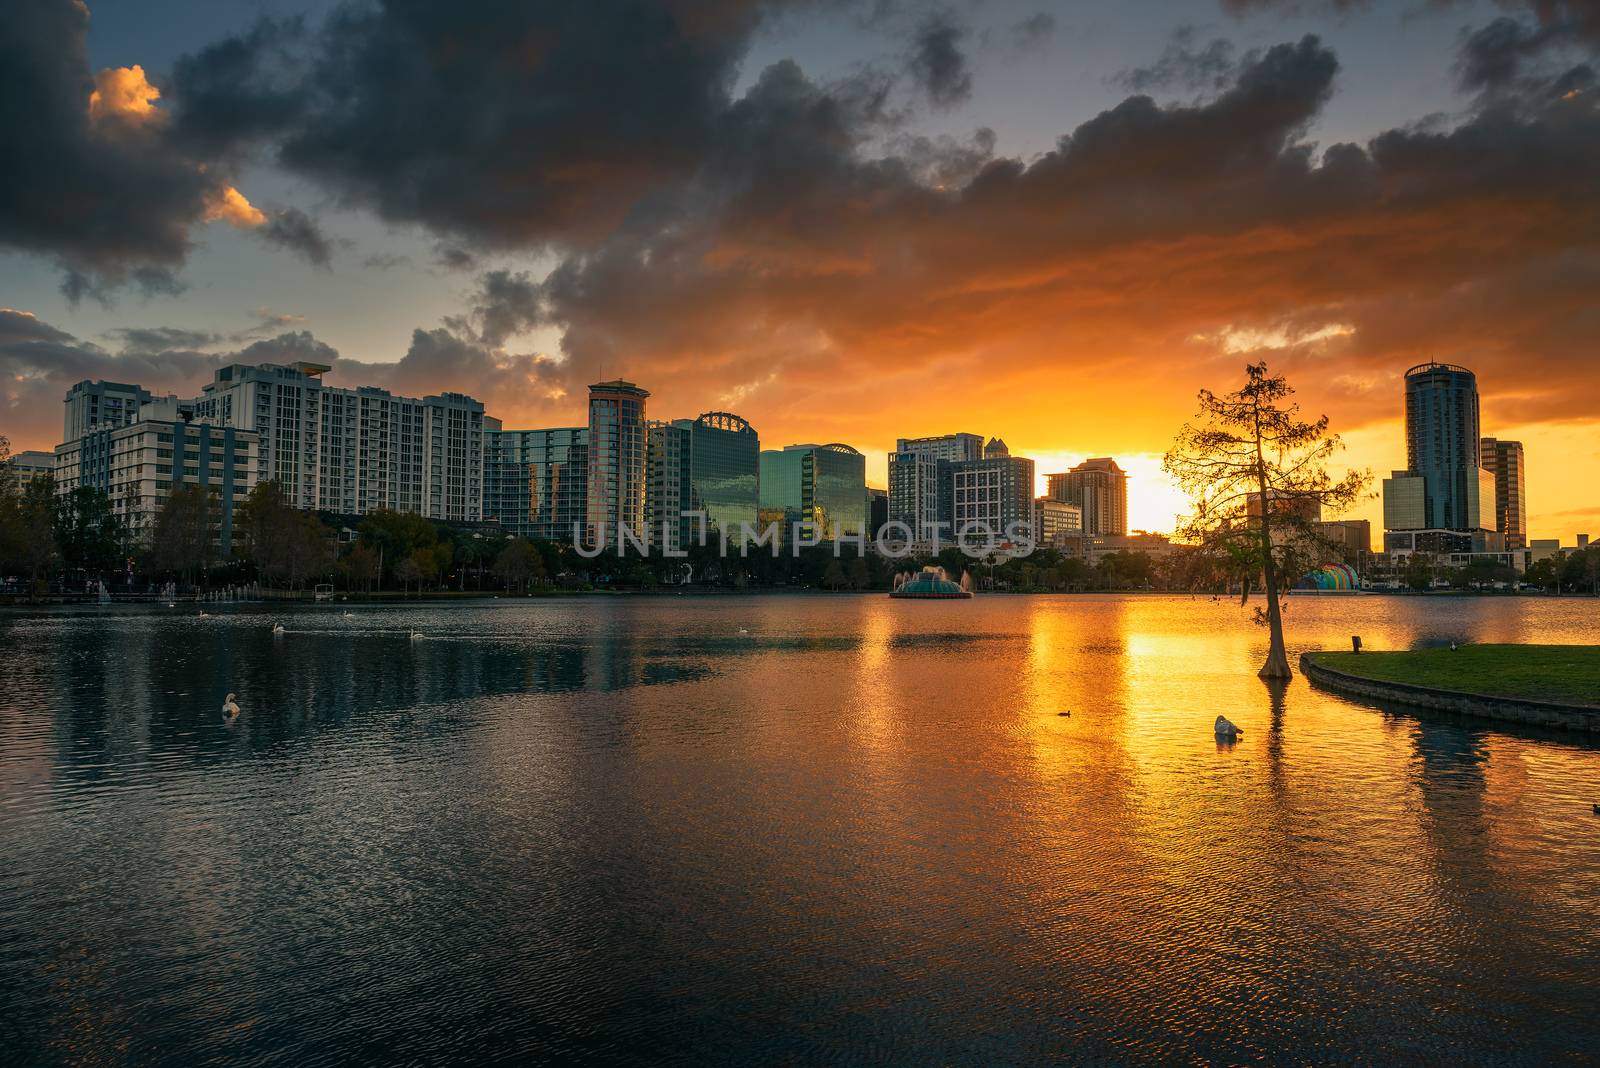 Colorful sunset above Lake Eola and city skyline in Orlando, Florida by nickfox